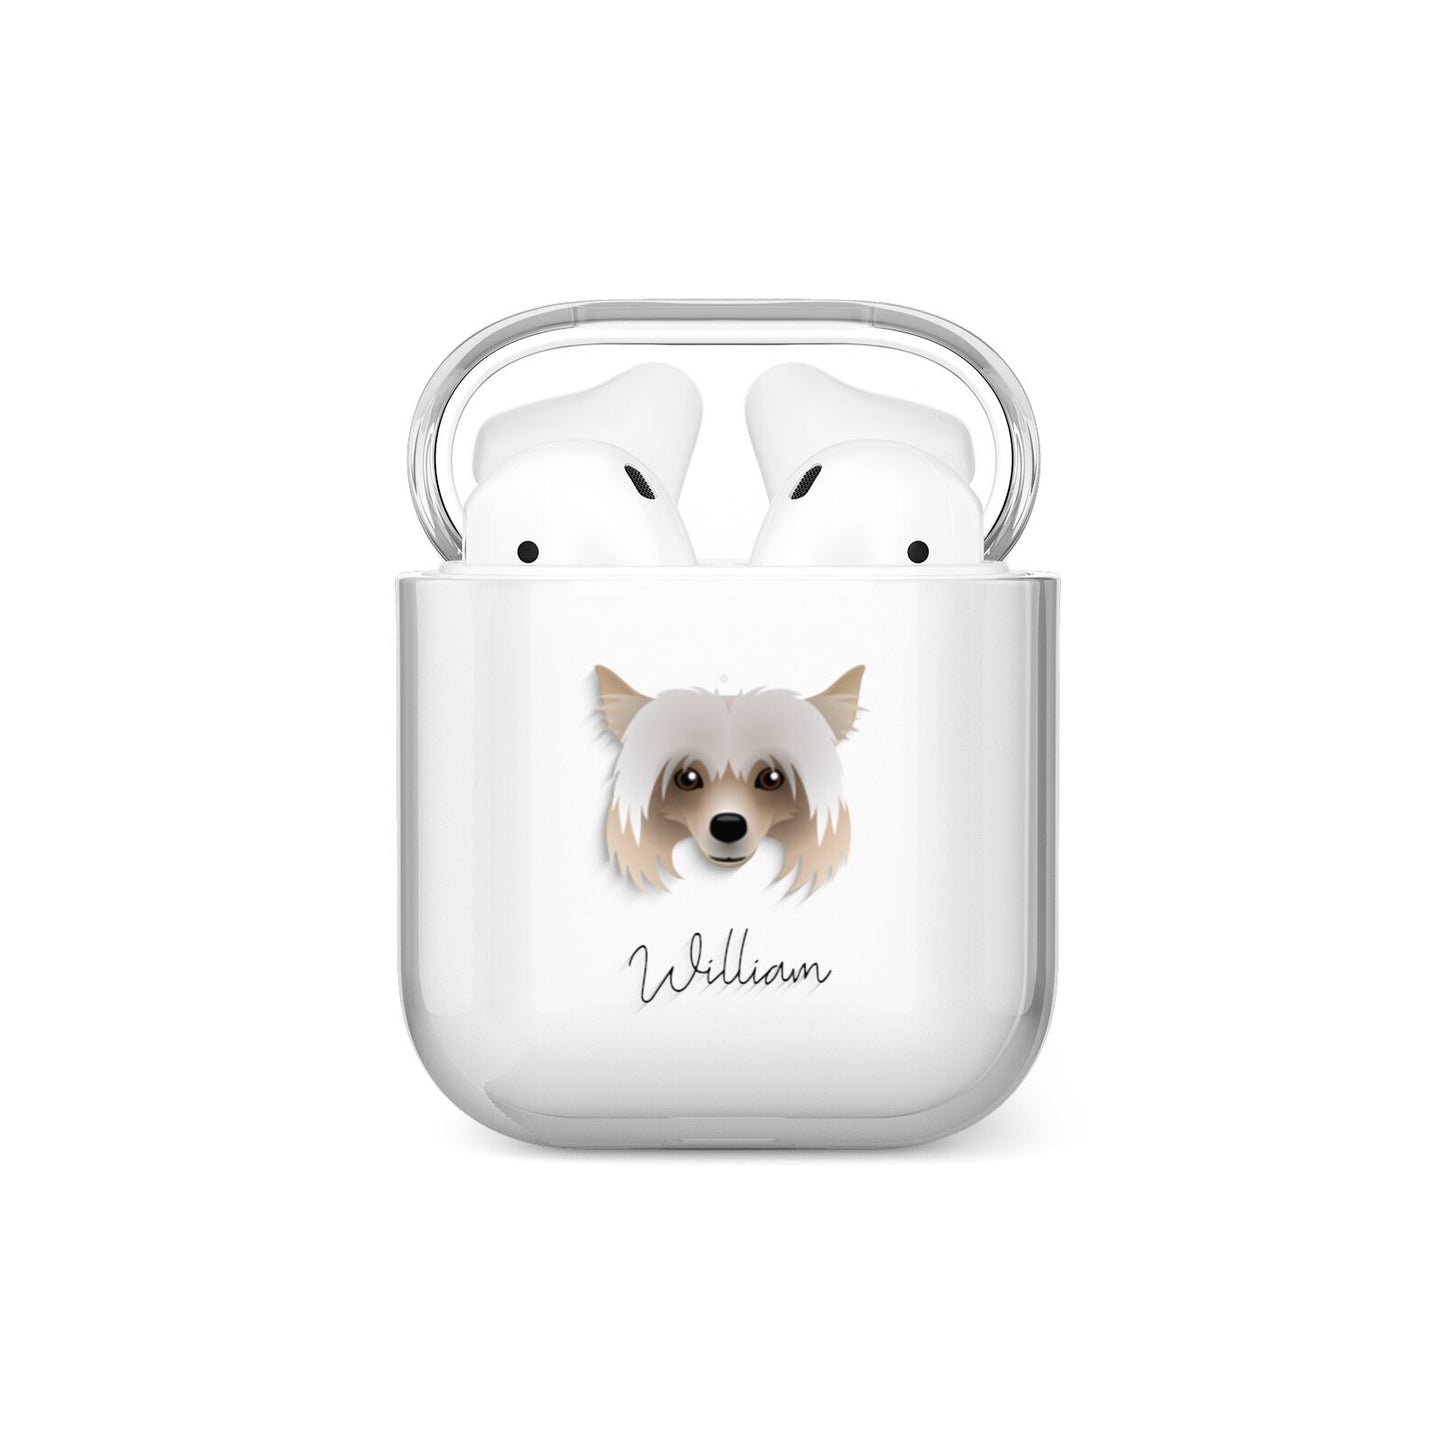 Powderpuff Chinese Crested Personalised AirPods Case